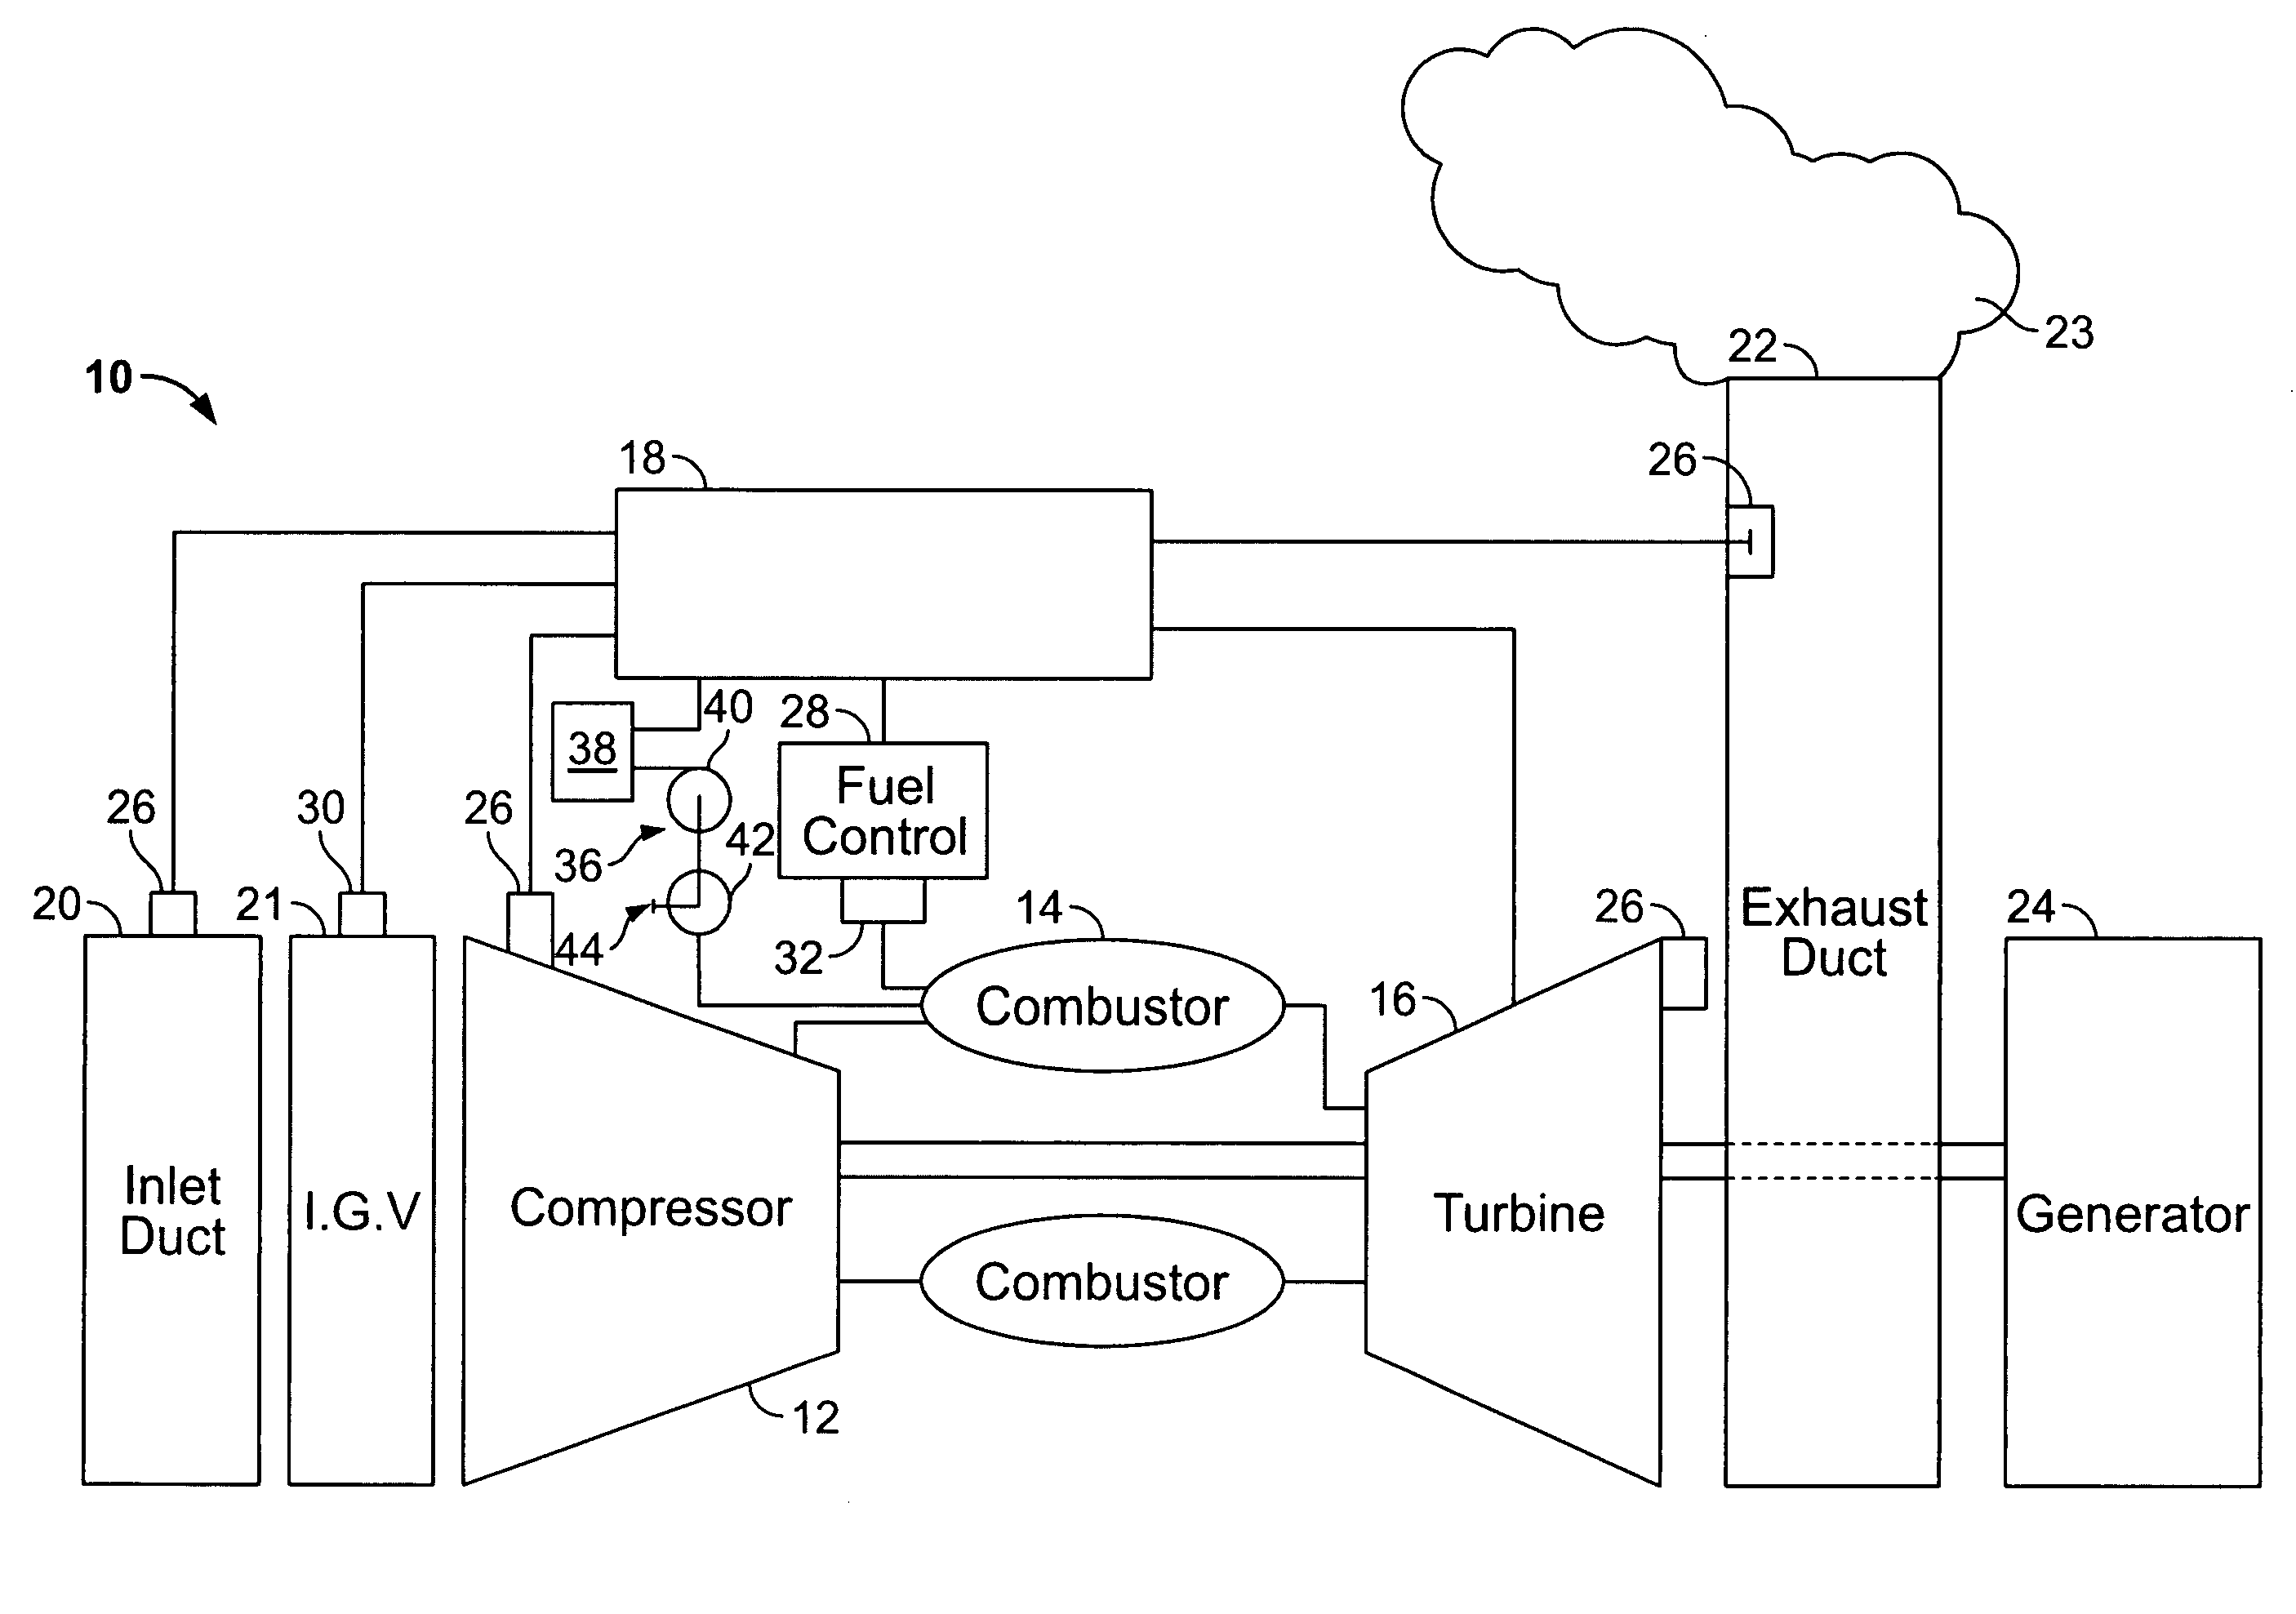 Systems for low emission gas turbine energy generation